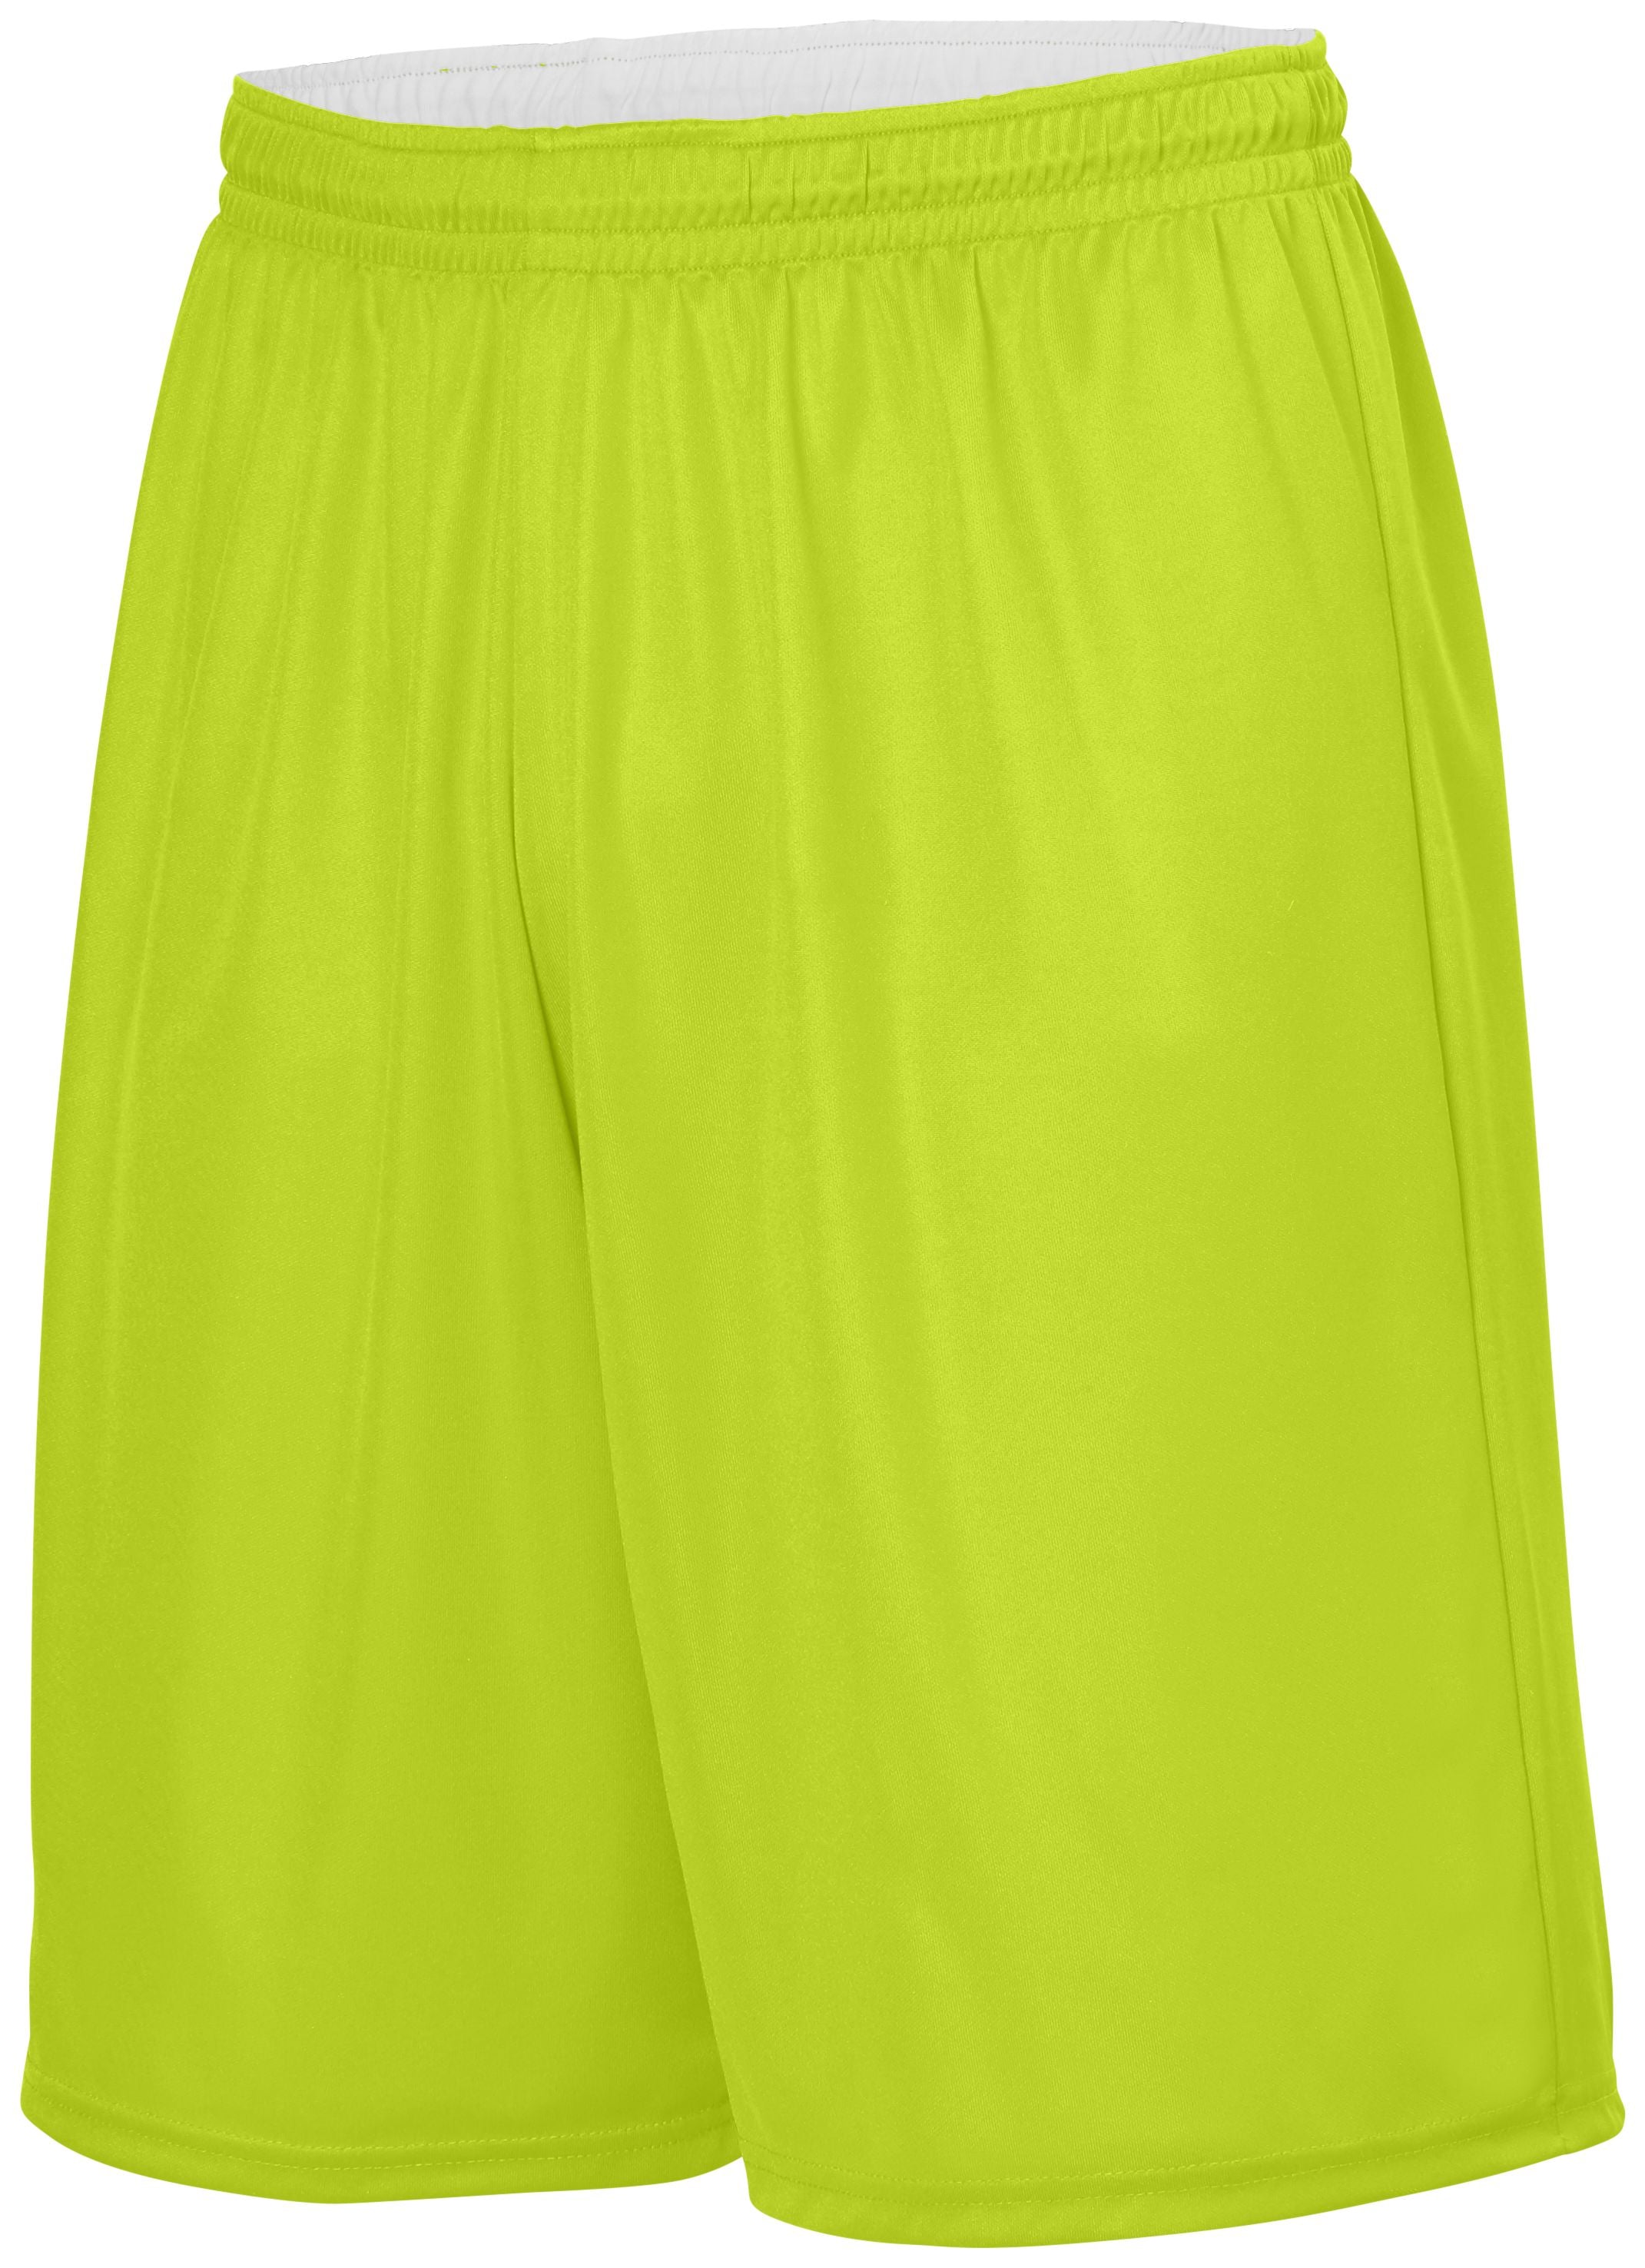 Augusta Sportswear Reversible Wicking Shorts in Lime/White  -Part of the Adult, Adult-Shorts, Augusta-Products, Basketball, All-Sports, All-Sports-1 product lines at KanaleyCreations.com